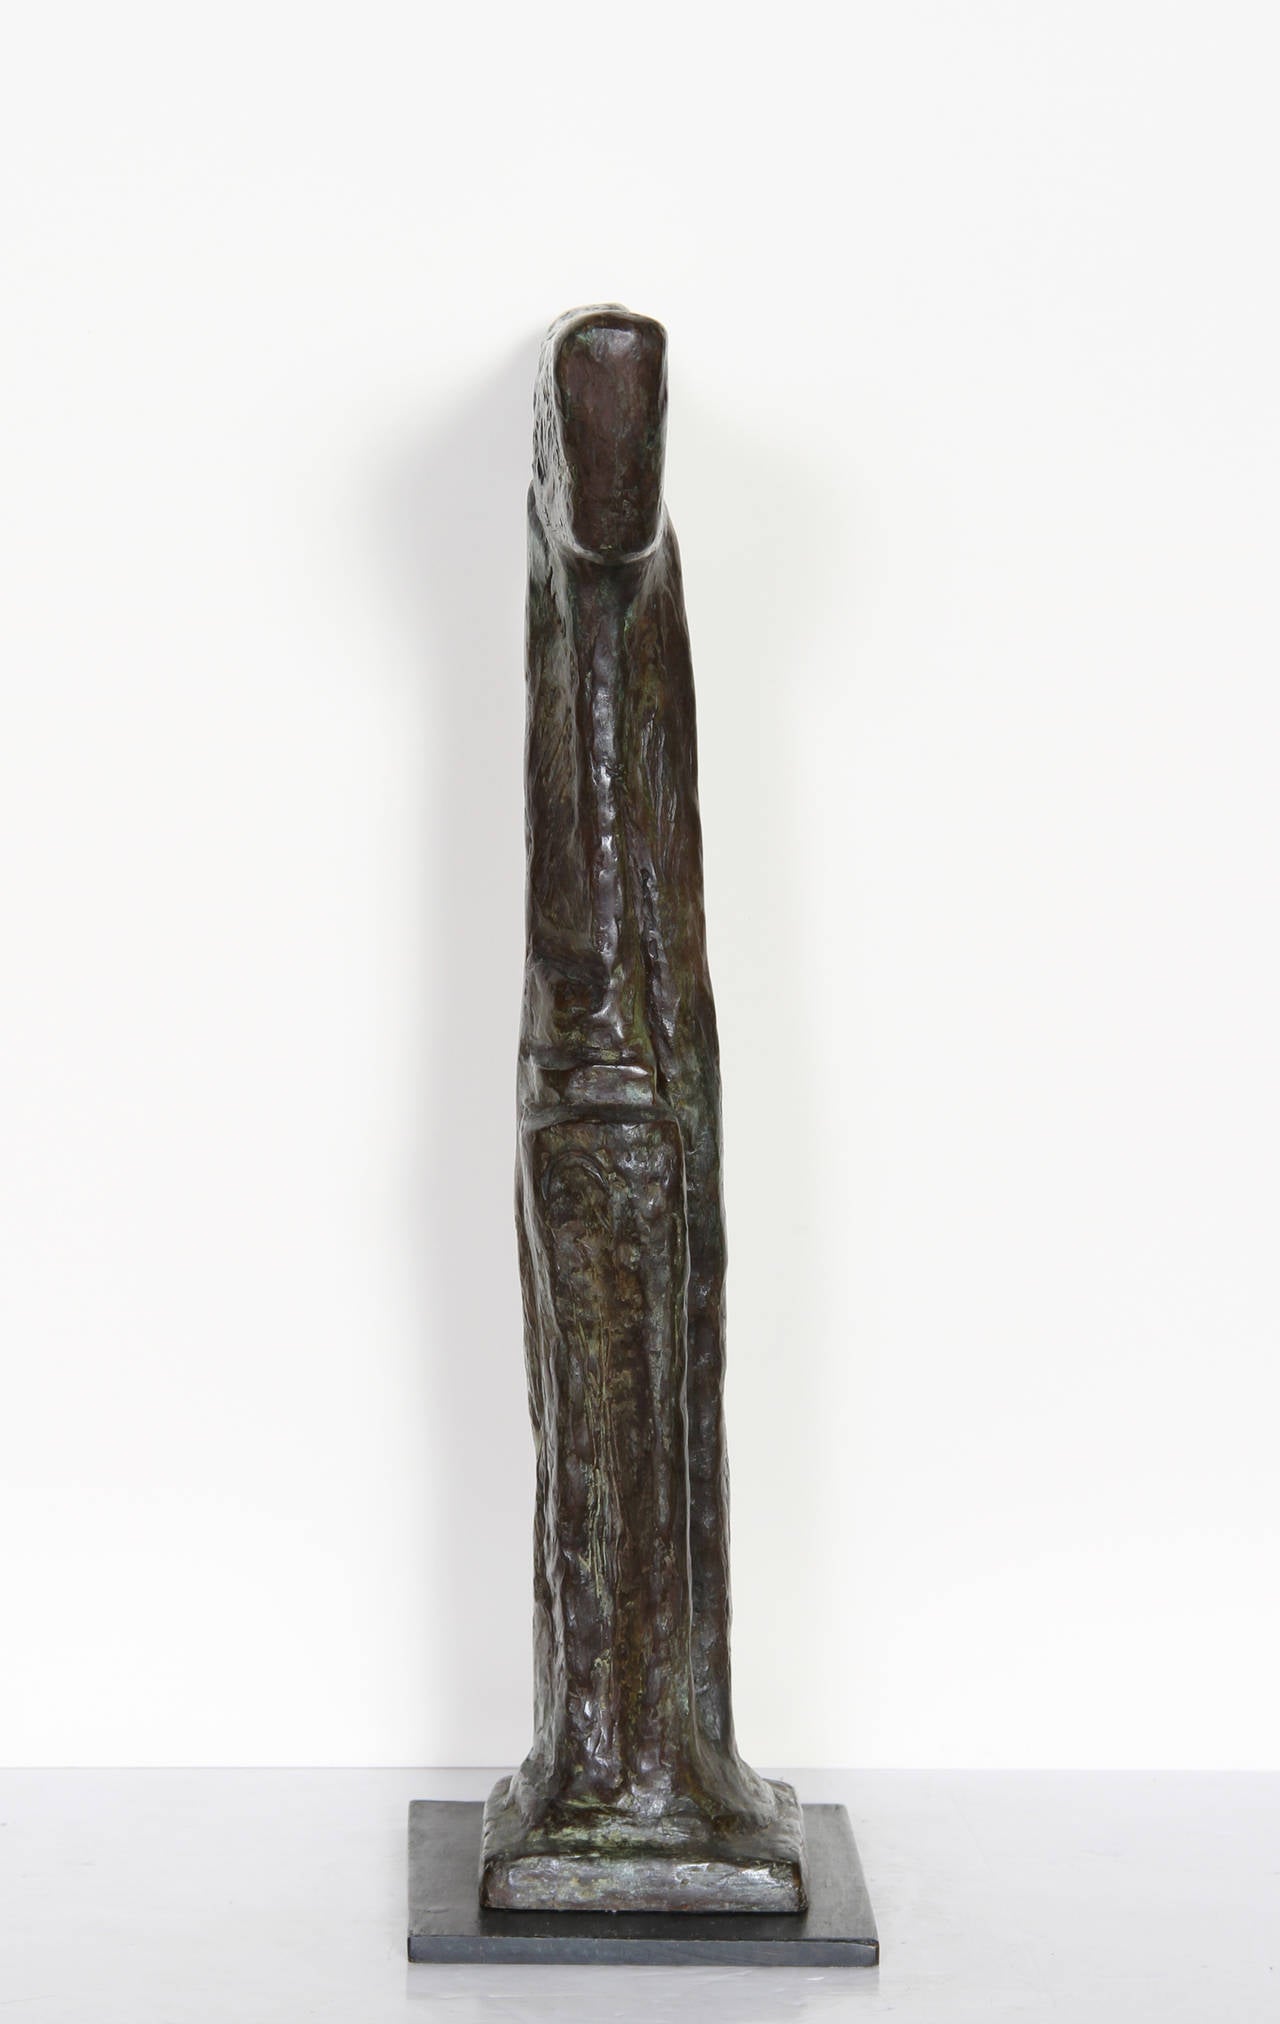 Artist: Thom Cooney-Crawford, American (1944 - )
Title: Four Earth Signs: Wingeo
Medium: Bronze Sculpture, signature and number inscribed
Edition: 4/5
Size: 20.5 in. x 11 in. x 4 in. (52.07 cm x 27.94 cm x 10.16 cm)